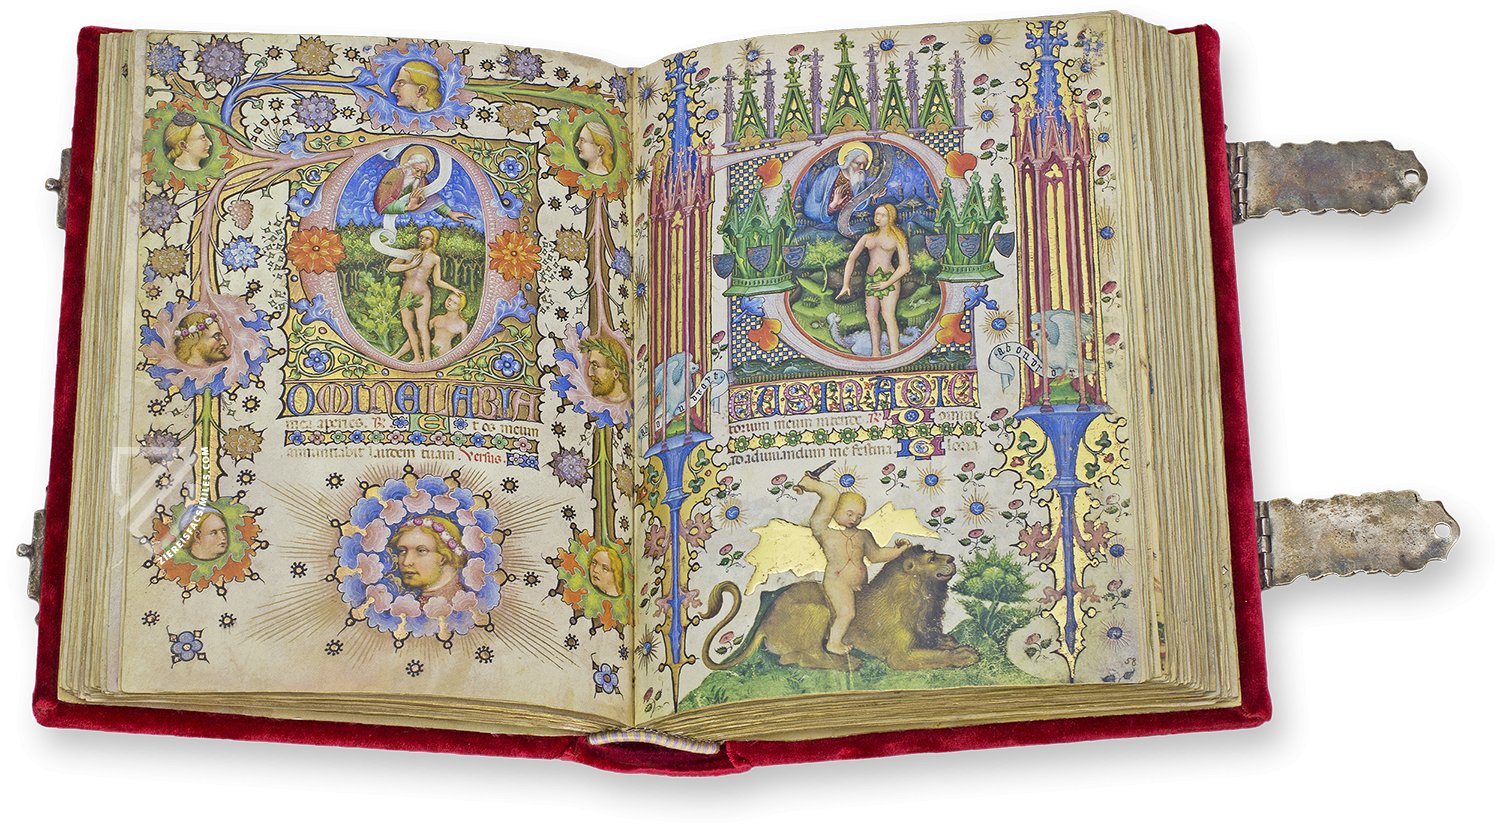 A testimony of the wealth of the Duchy of Milan (Book of Hours of the Visconti, Probably Milan (Italy) – ca. 1390, Completed after 1428)